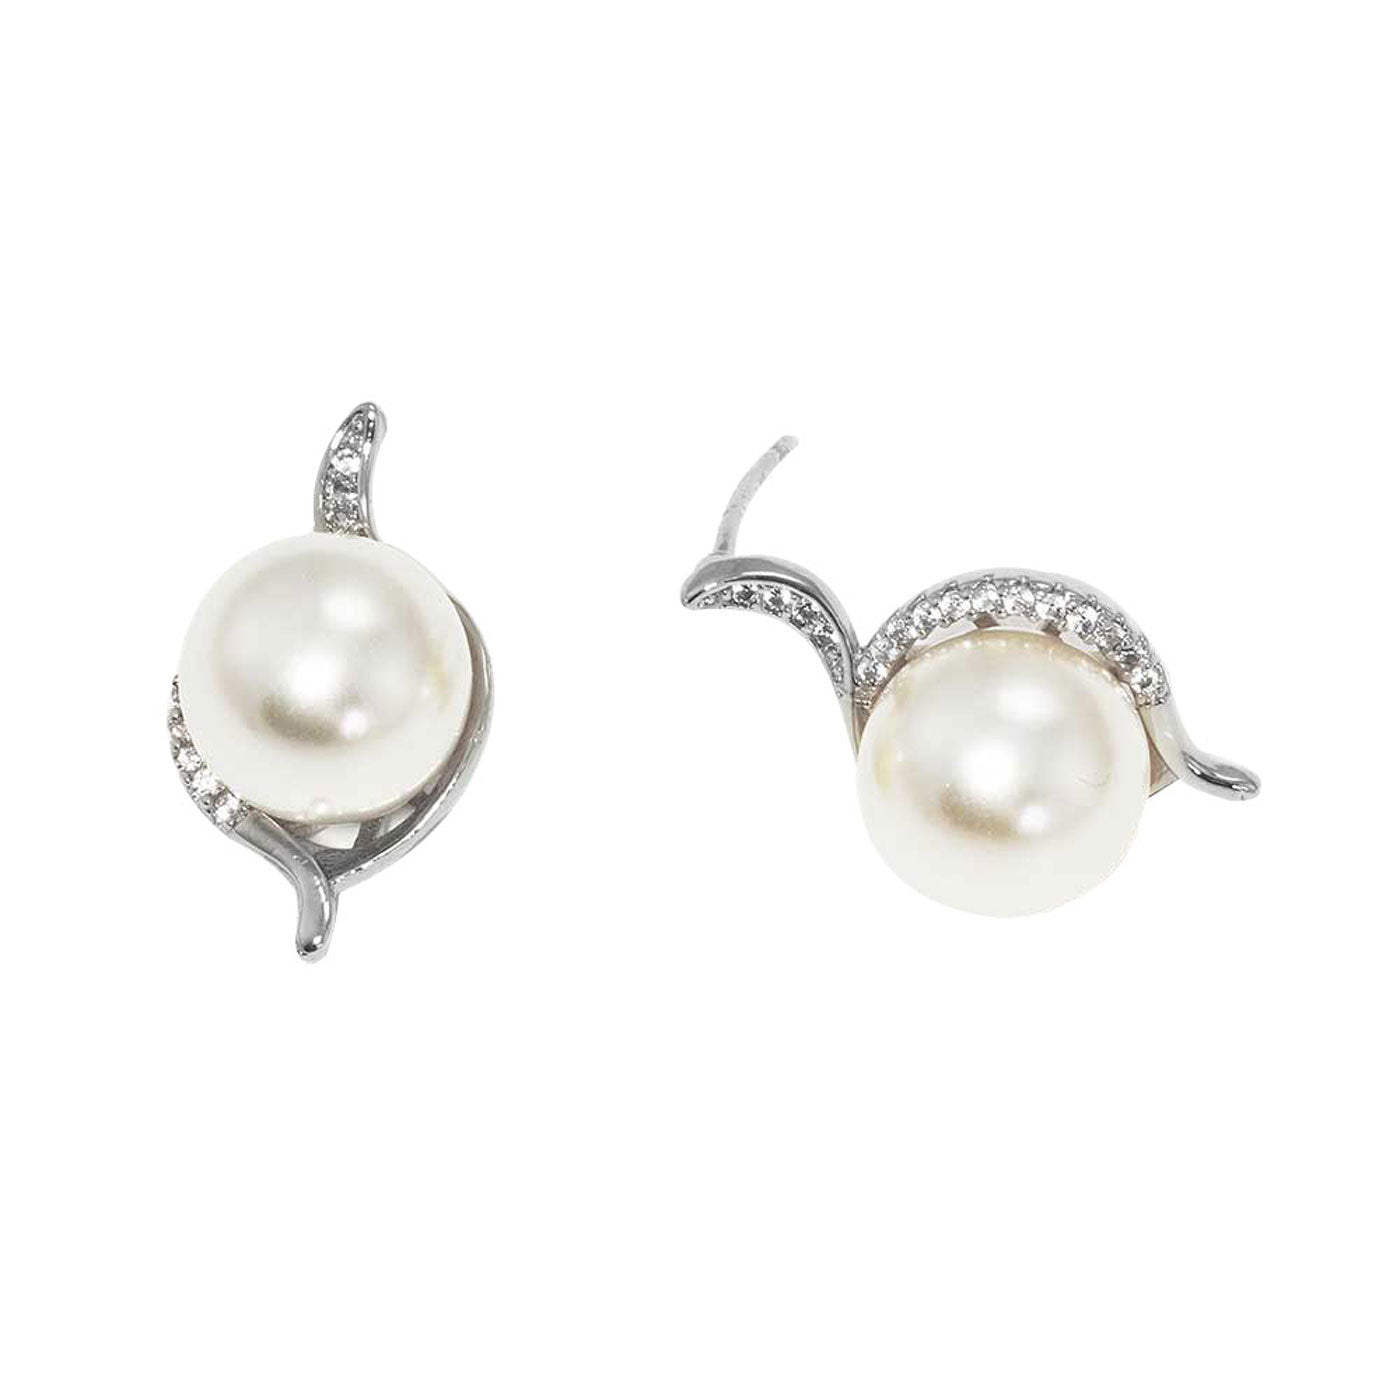 Cream Gold White Gold Dipped CZ Pearl Stud Earrings, ideal for parties, weddings, graduation, prom, quinceanera, holidays, pair these stud back earrings, add just the right amount of shine and you’ve got a look that’s polished to perfection. These earrings pair perfectly with any ensemble from business casual, to night out on the town or a black tie party.